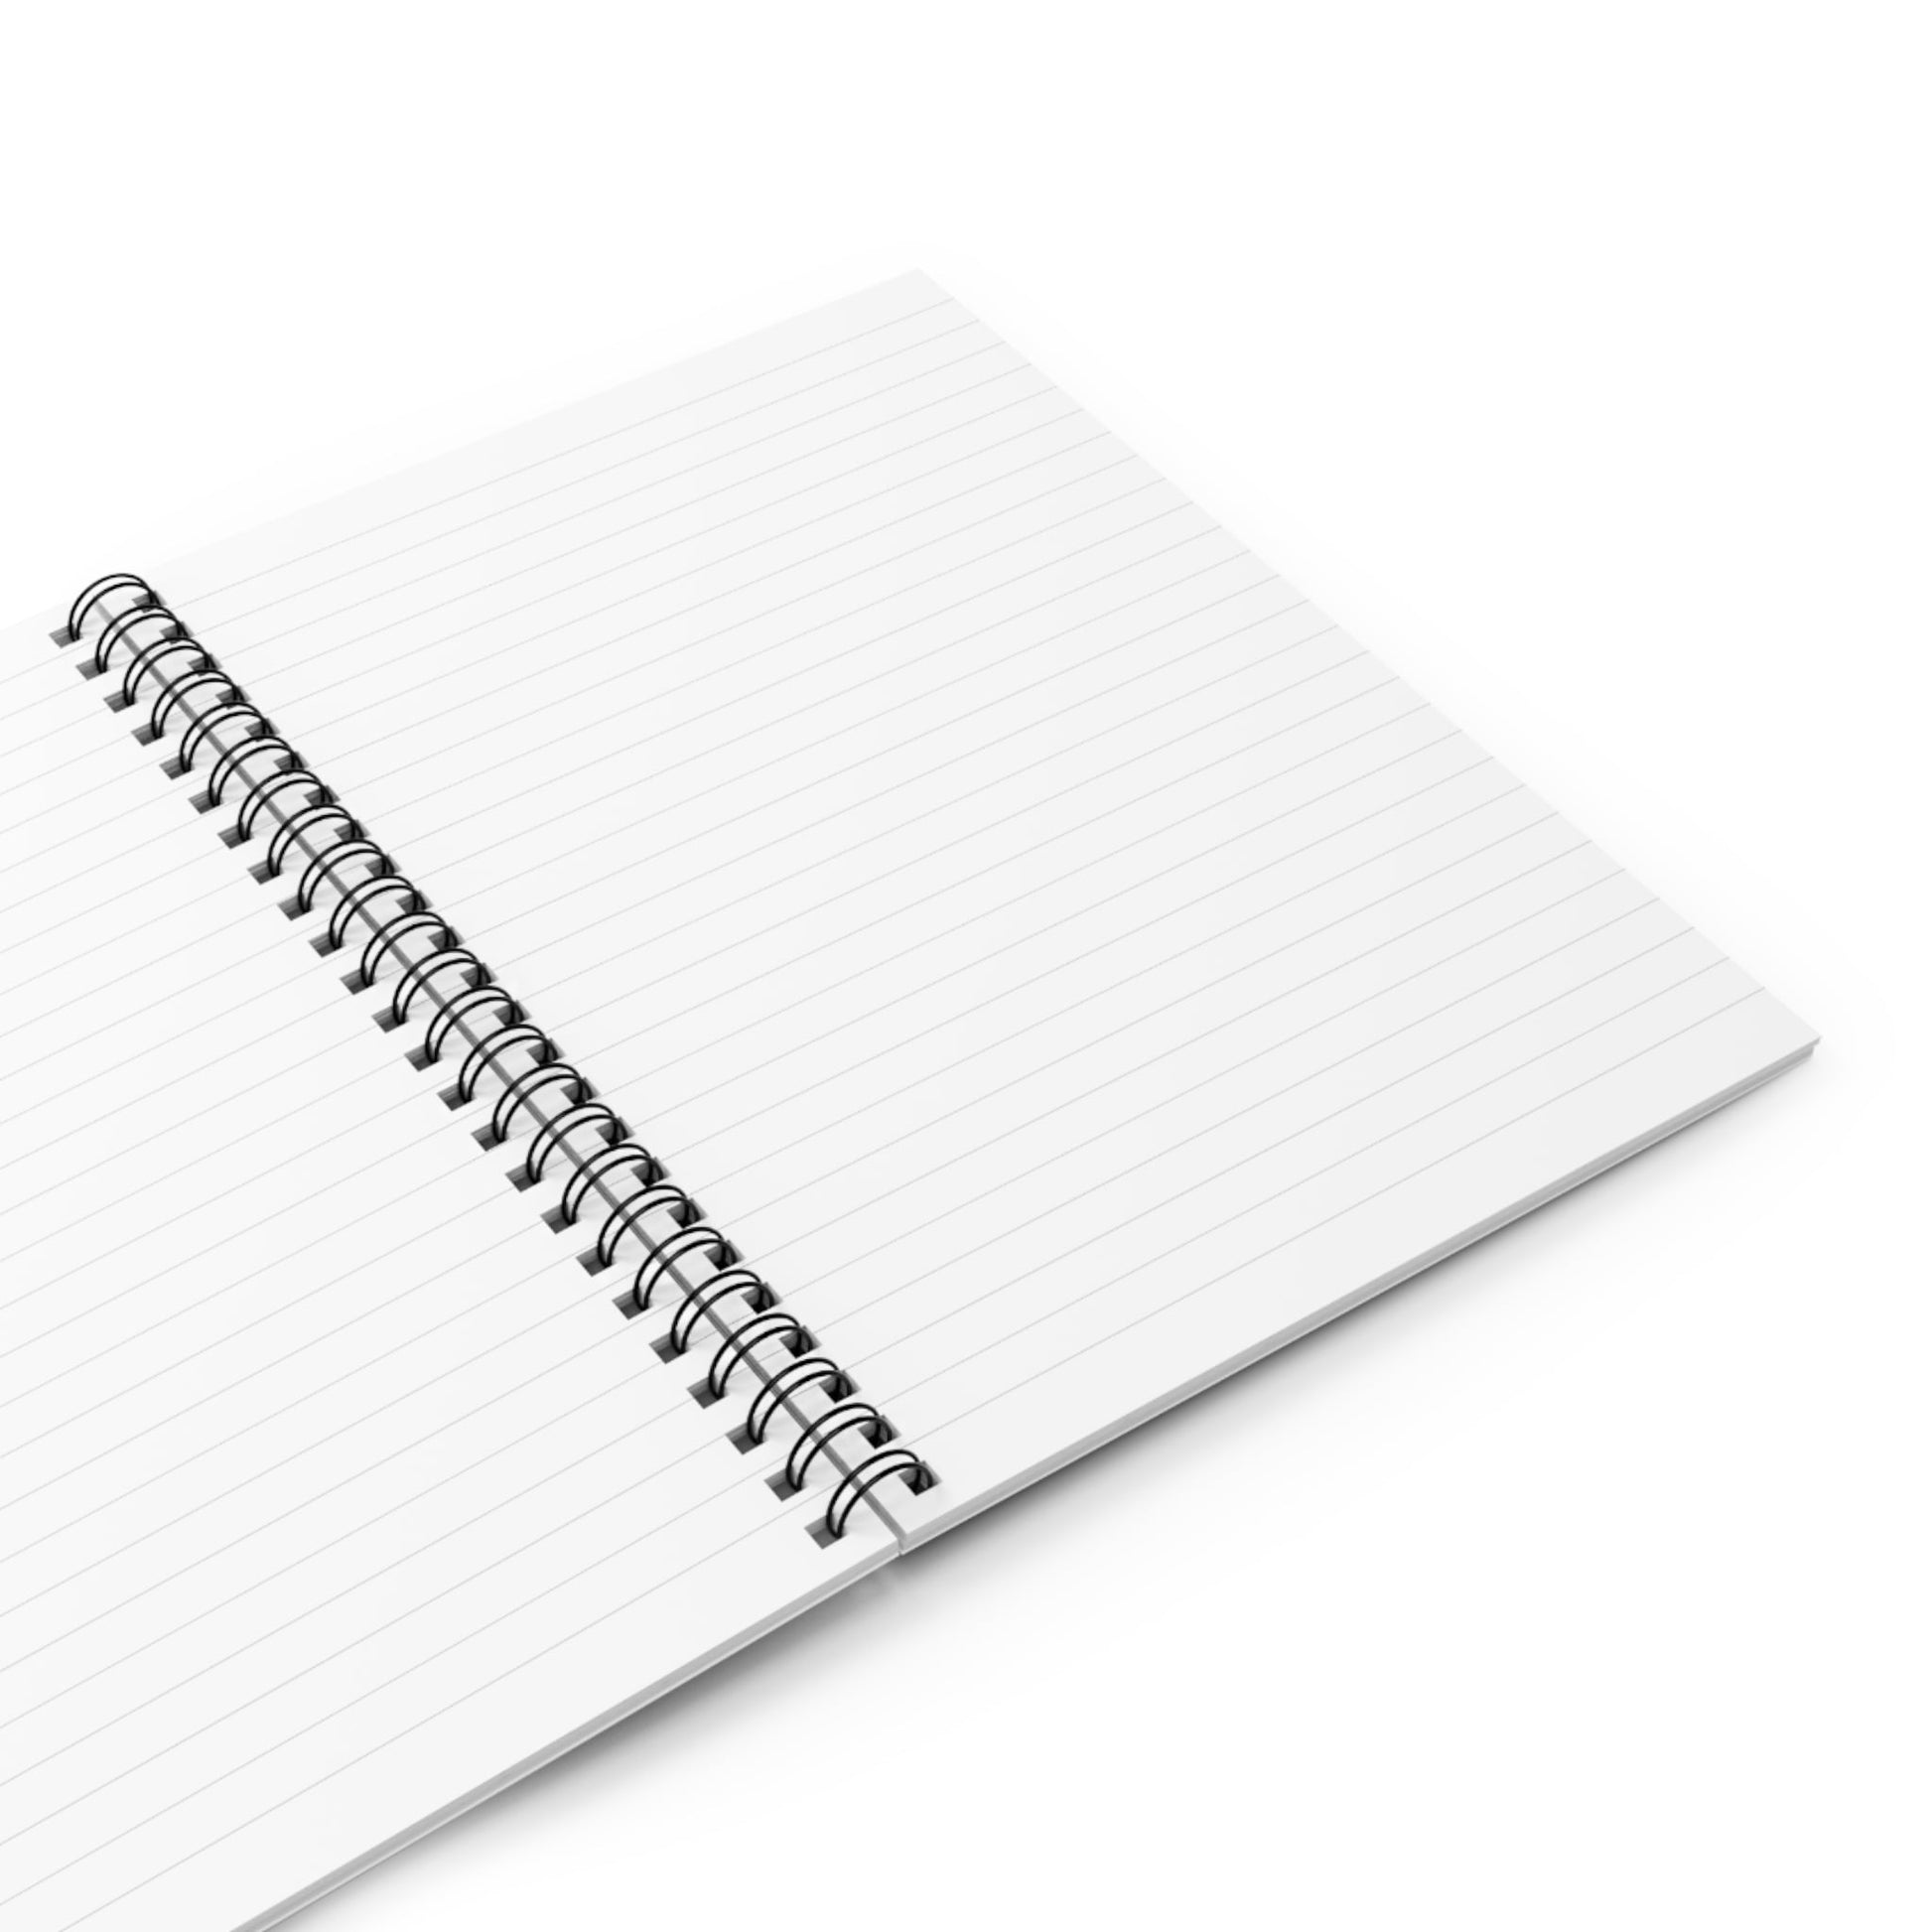 Spiral Notebook with Disaster Cover Opened with Blank White College Ruled Pages